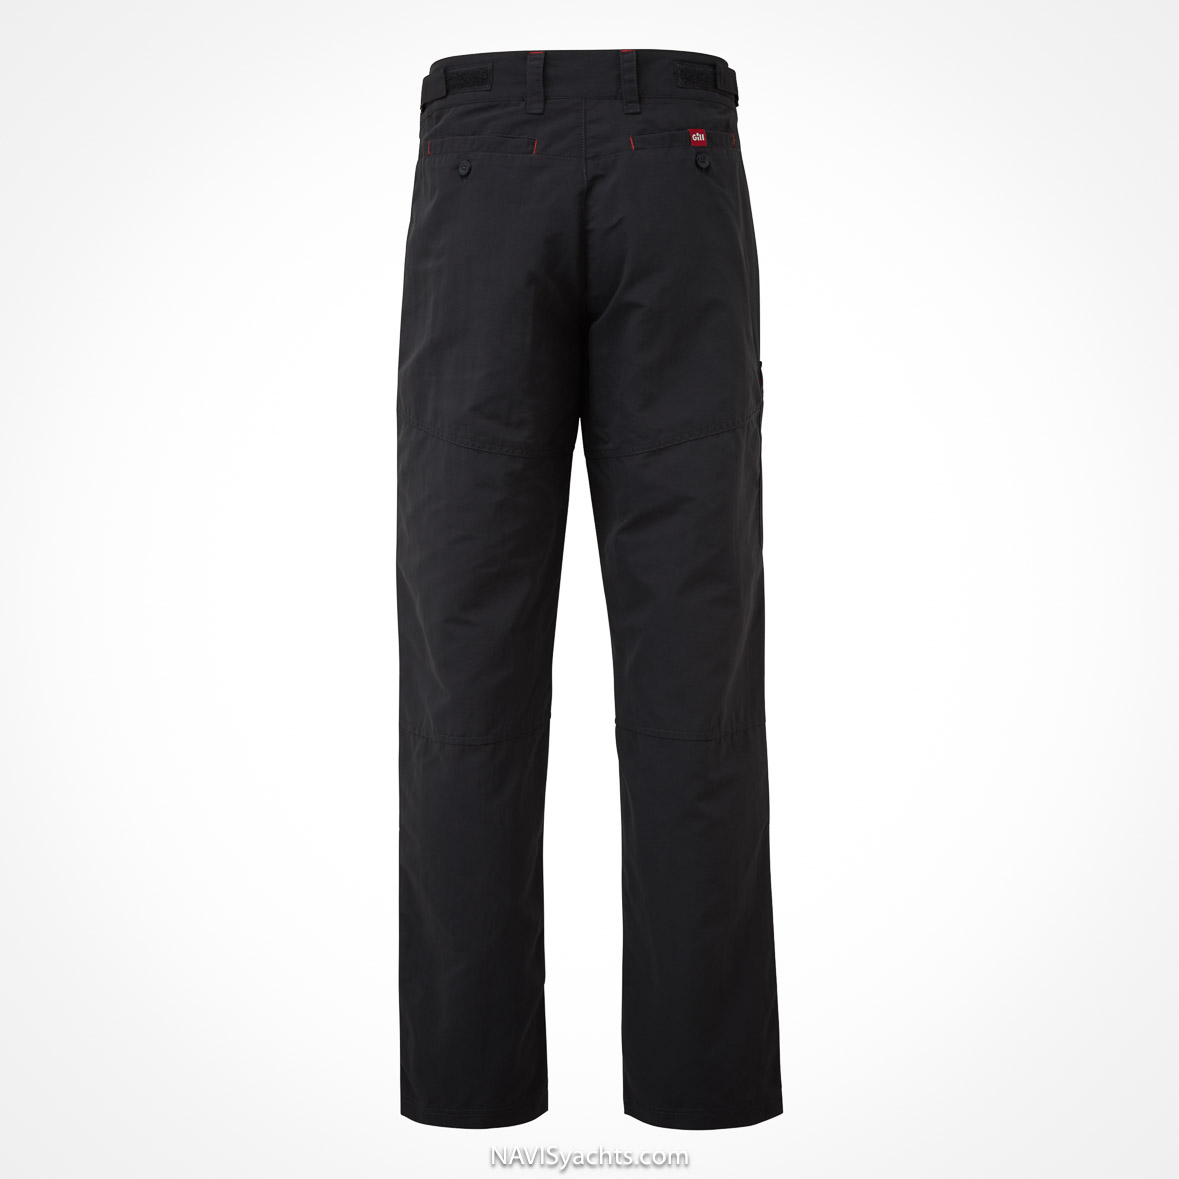 Gill's Men's UV Tec Trousers with 4-way stretch and 50+ UV protection, ideal for water-based activities.